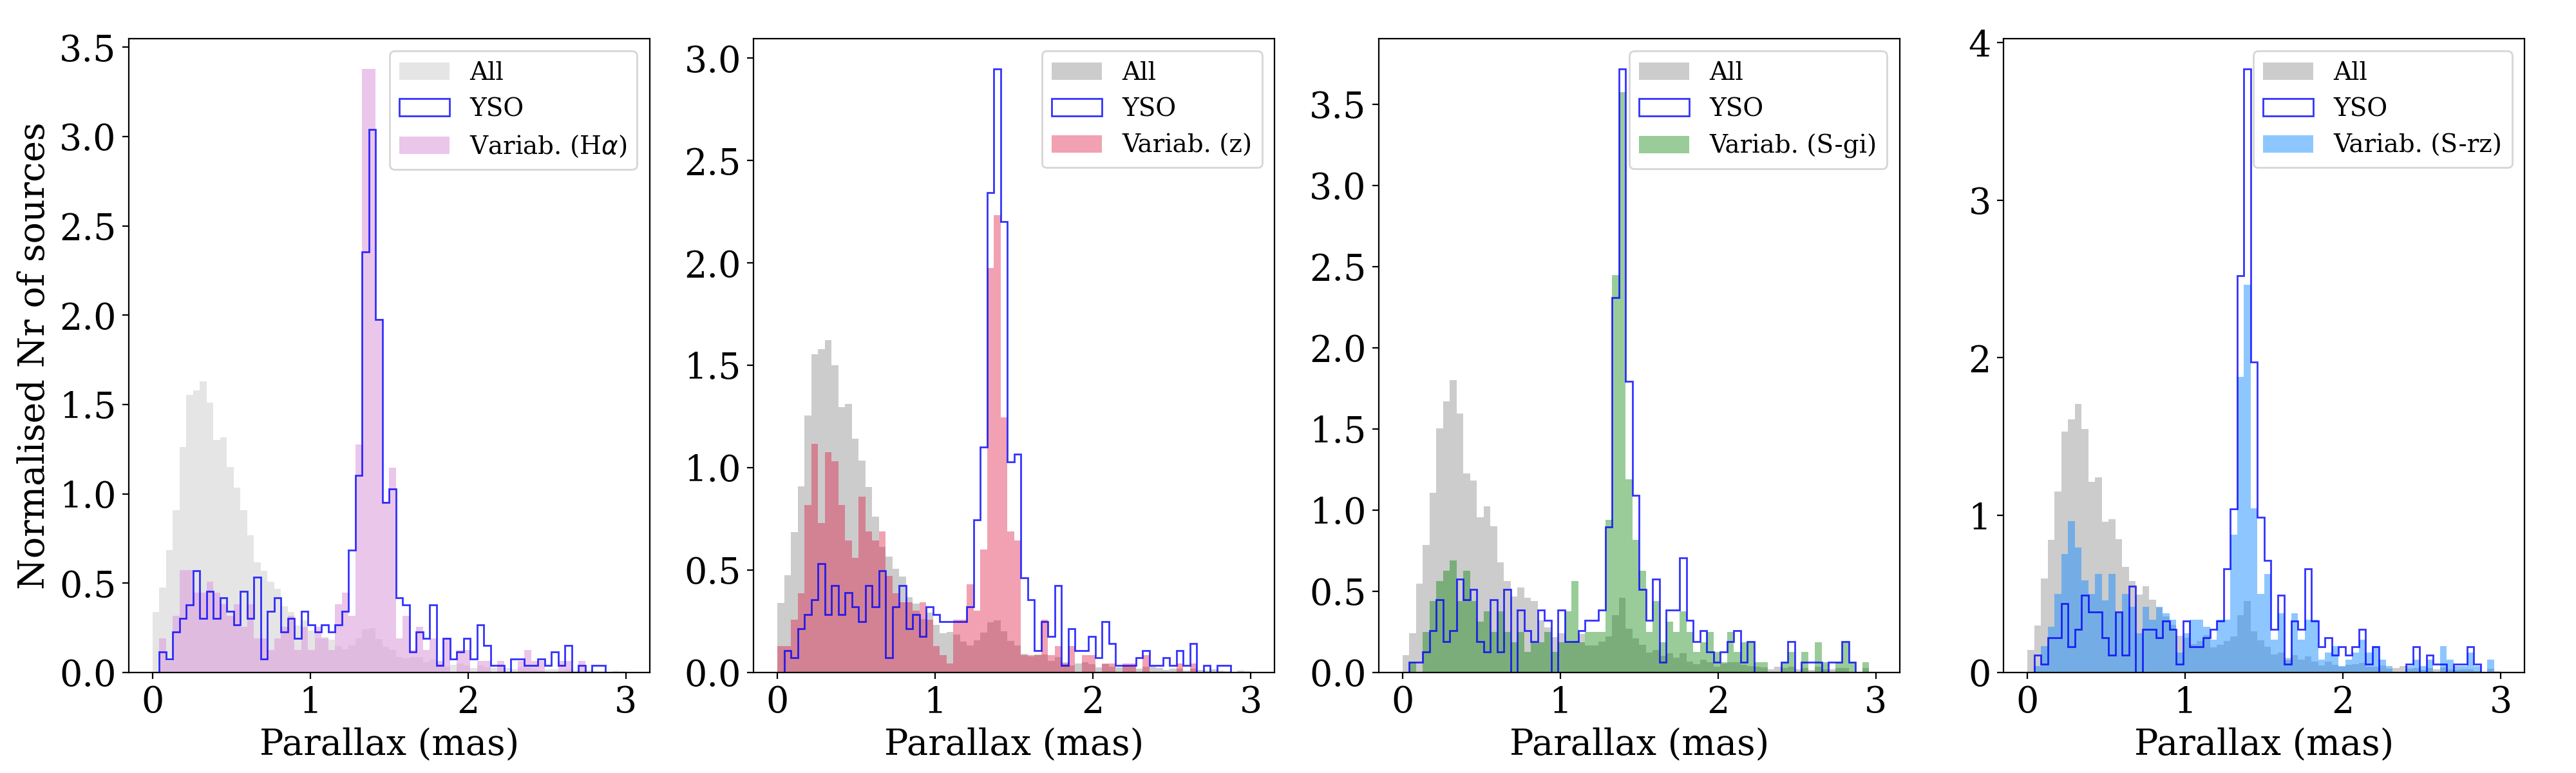 NGC2264 Index Vs Parallax in several filters.